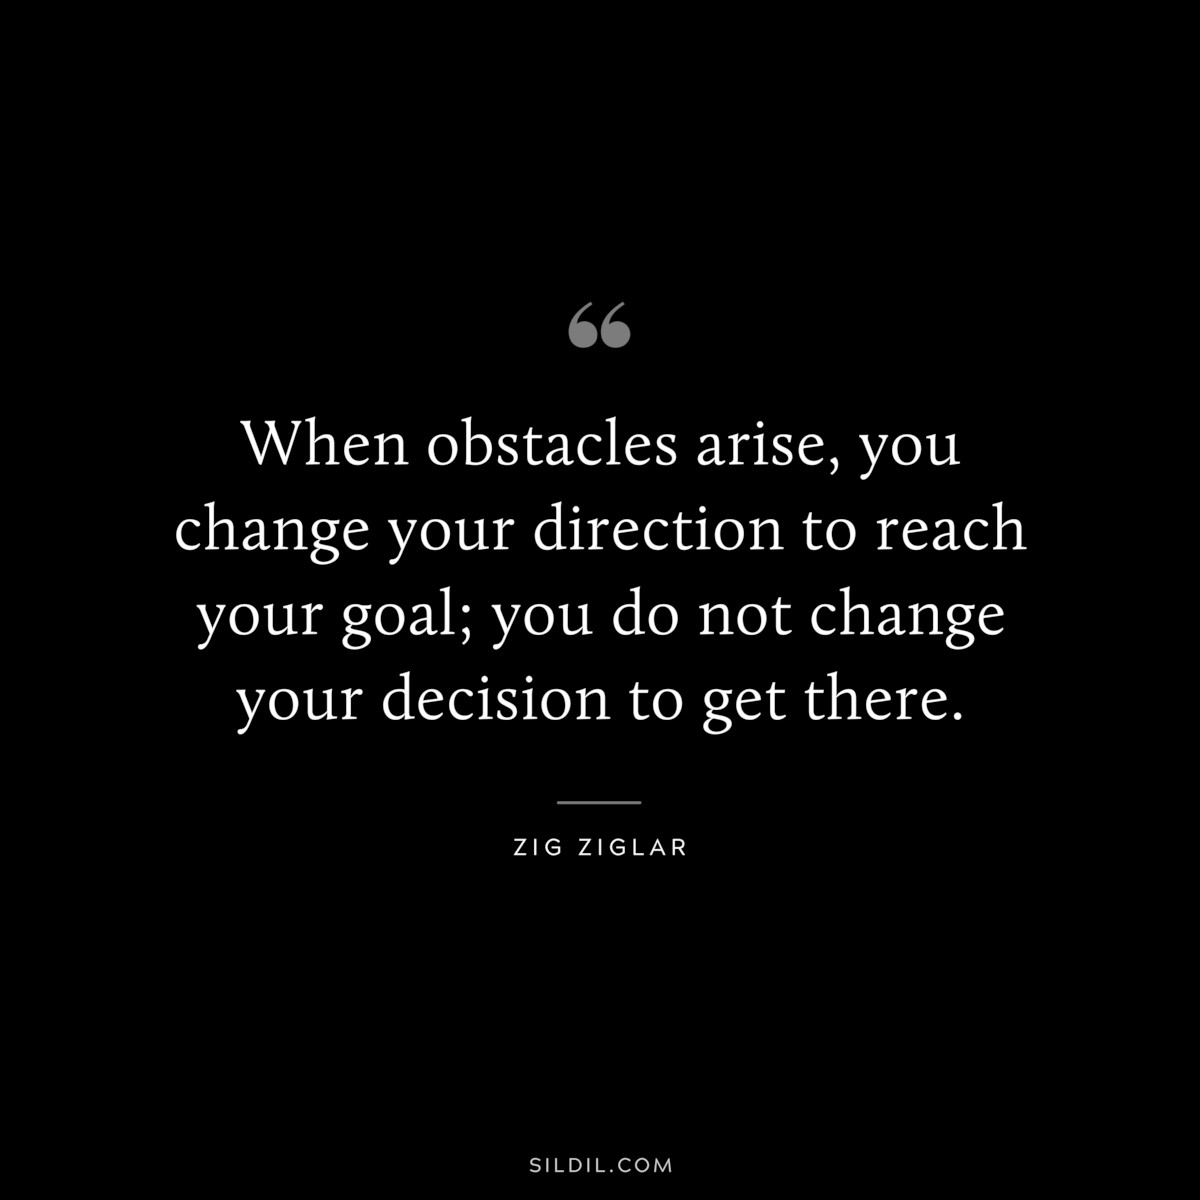 When obstacles arise, you change your direction to reach your goal; you do not change your decision to get there. ― Zig Ziglar